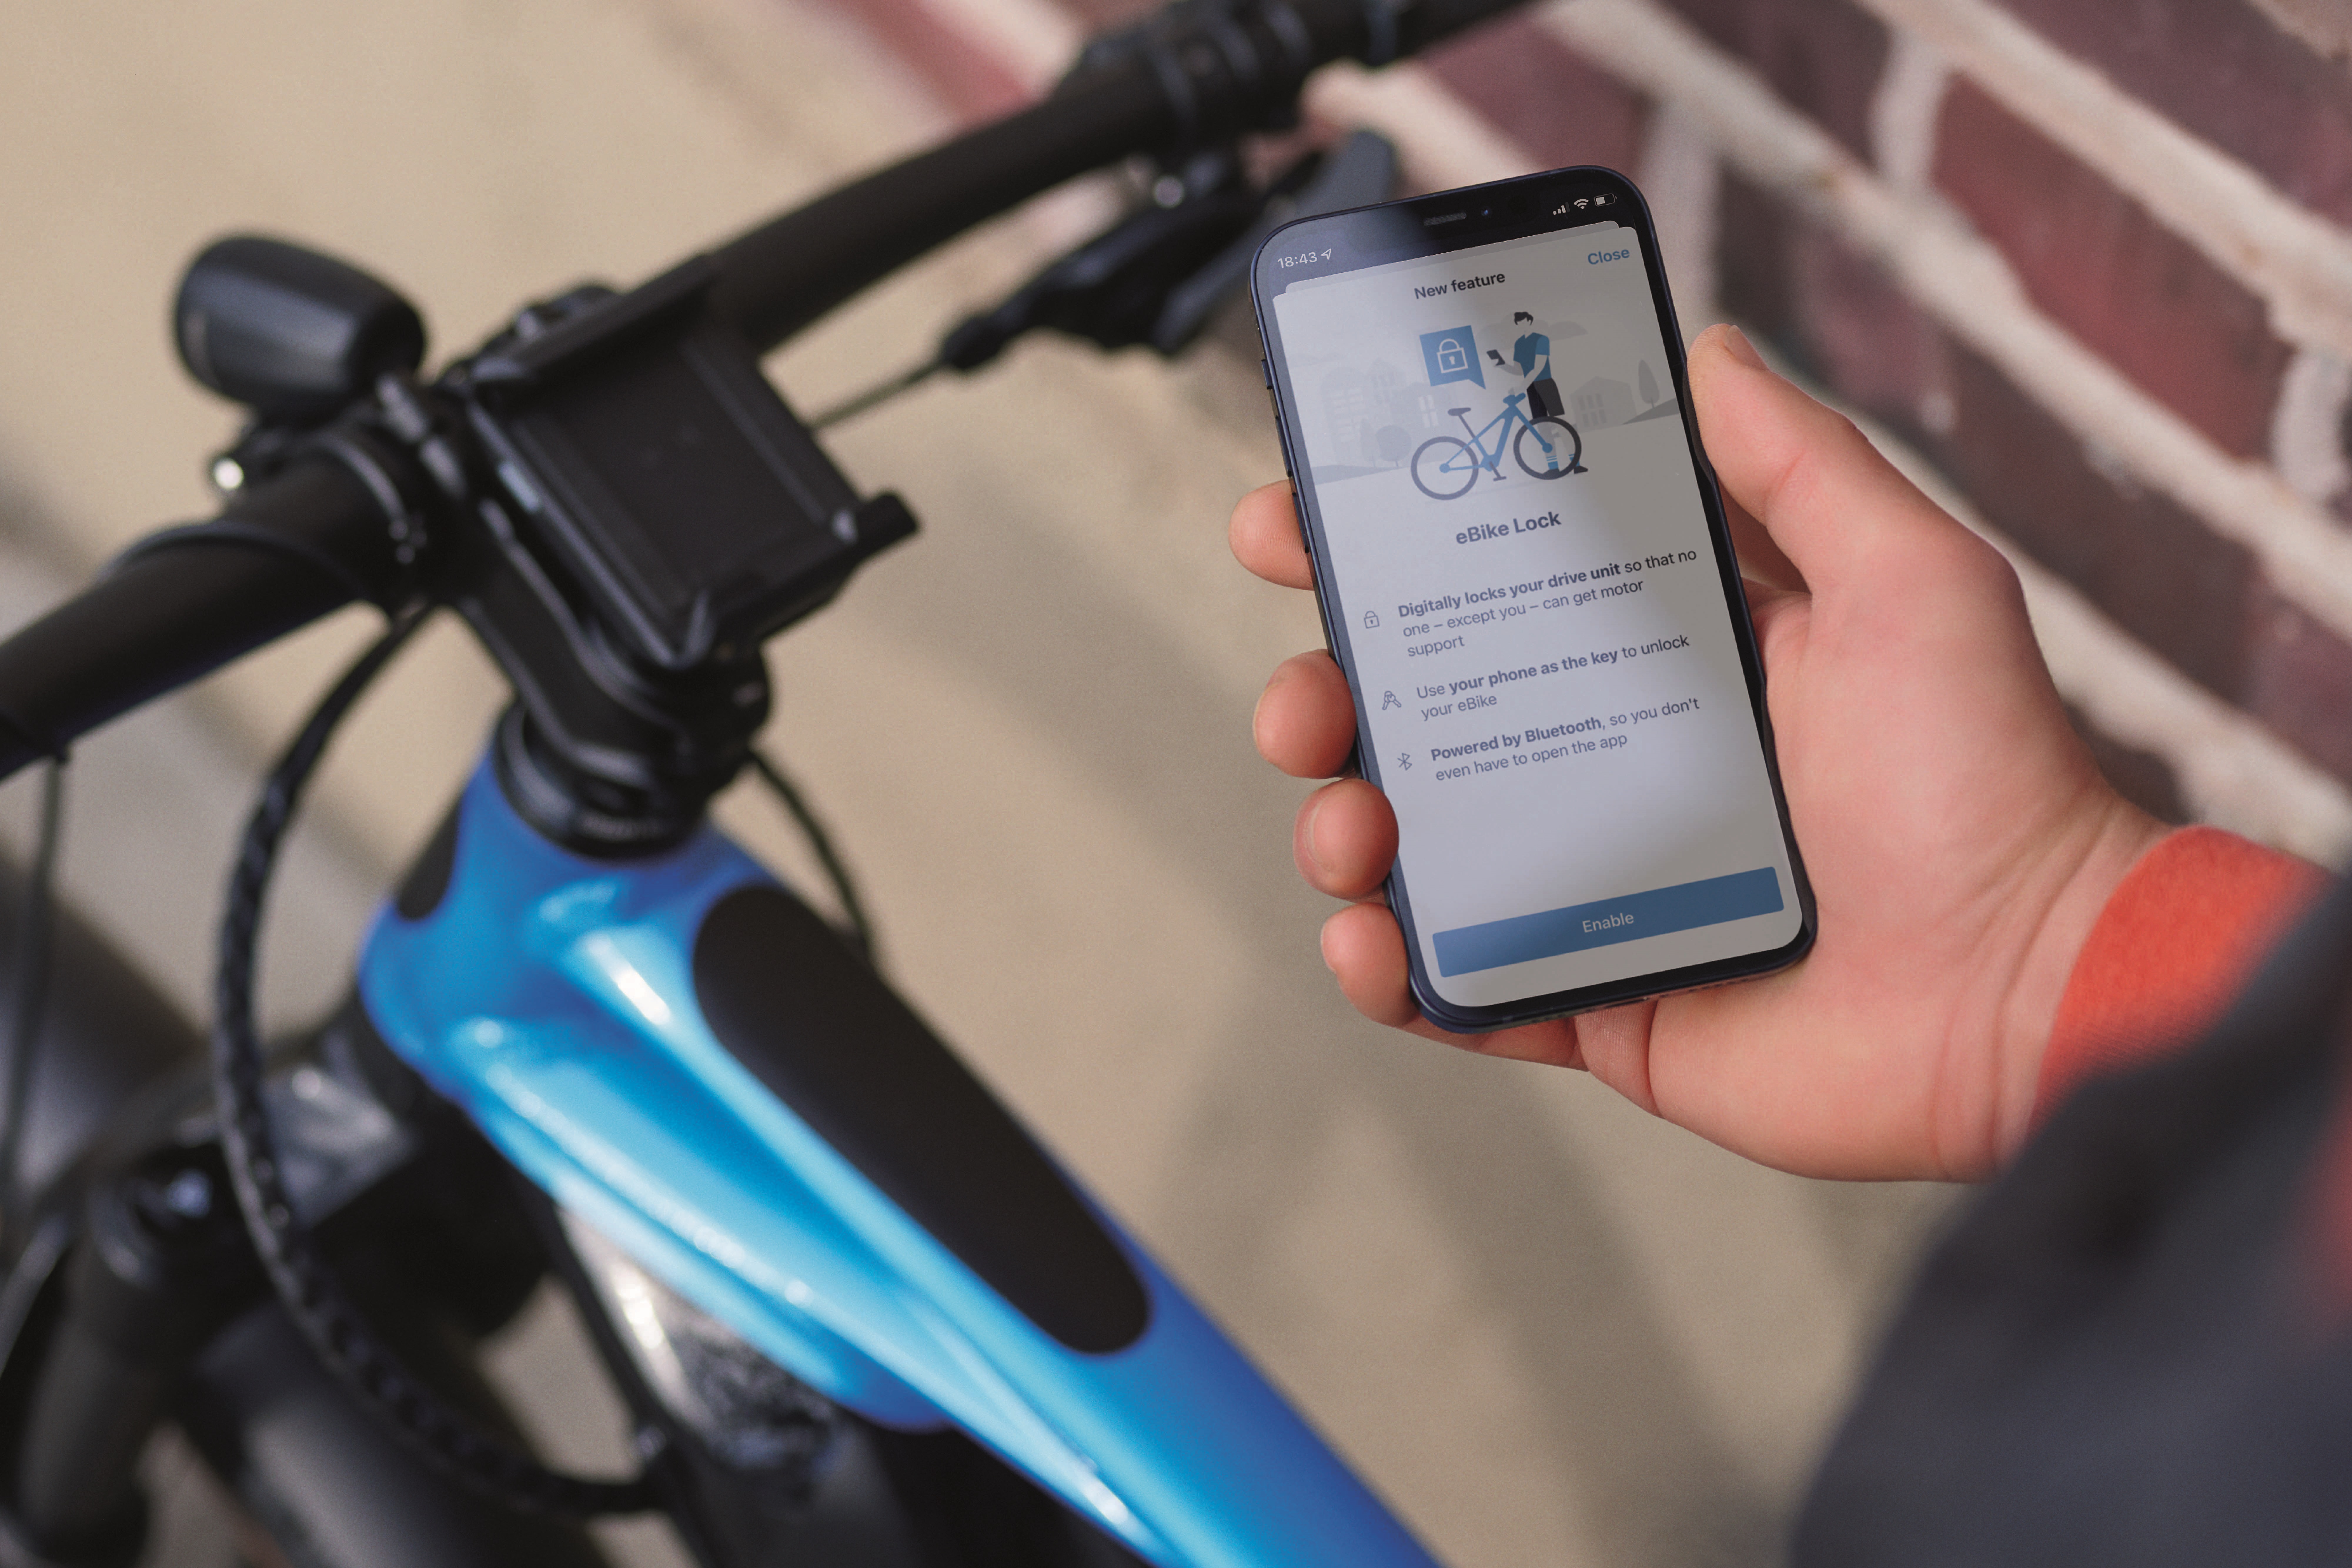 The eBike Lock function serves as additional theft protection to the mechanical lock. Only when the system recognises the associated smartphone via Bluetooth is the motor support automatically enabled when the eBike is switched on.